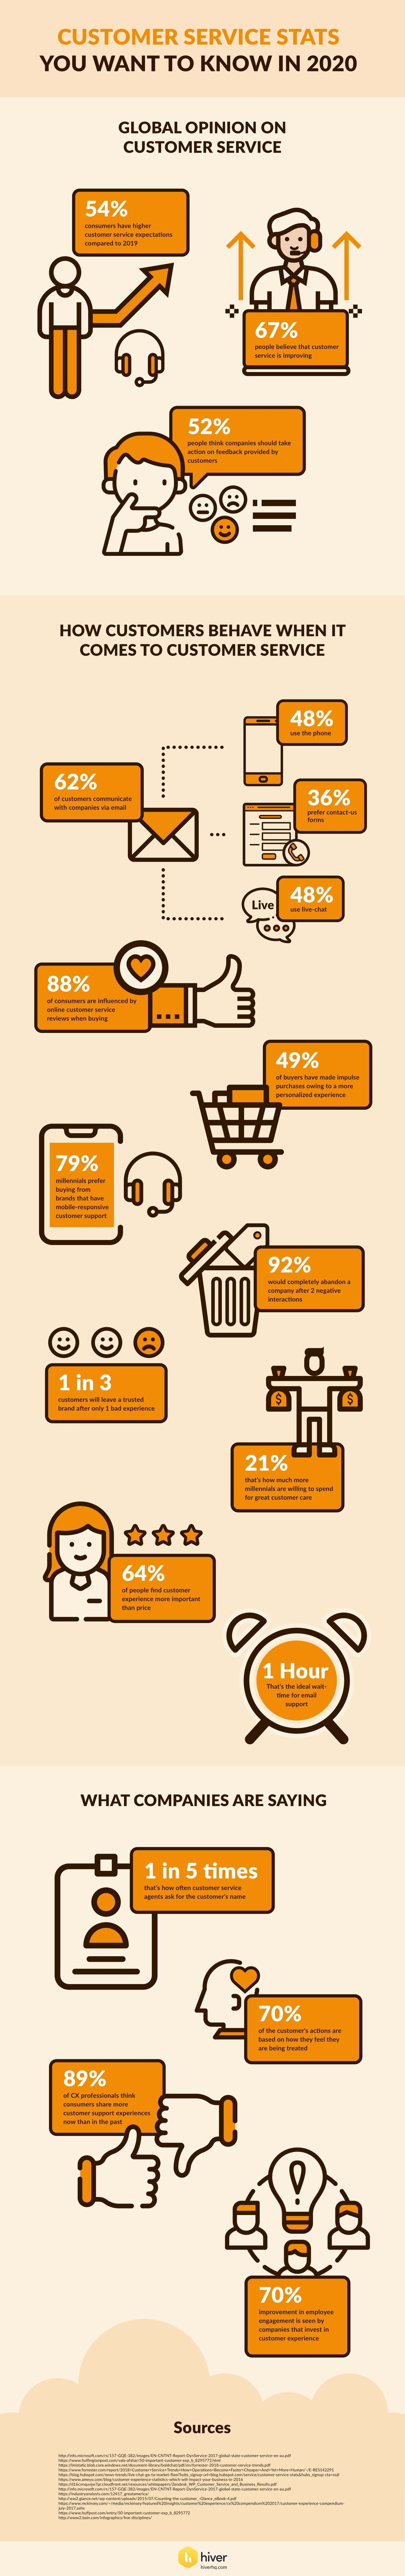 customer-service-stats-2020-infographic